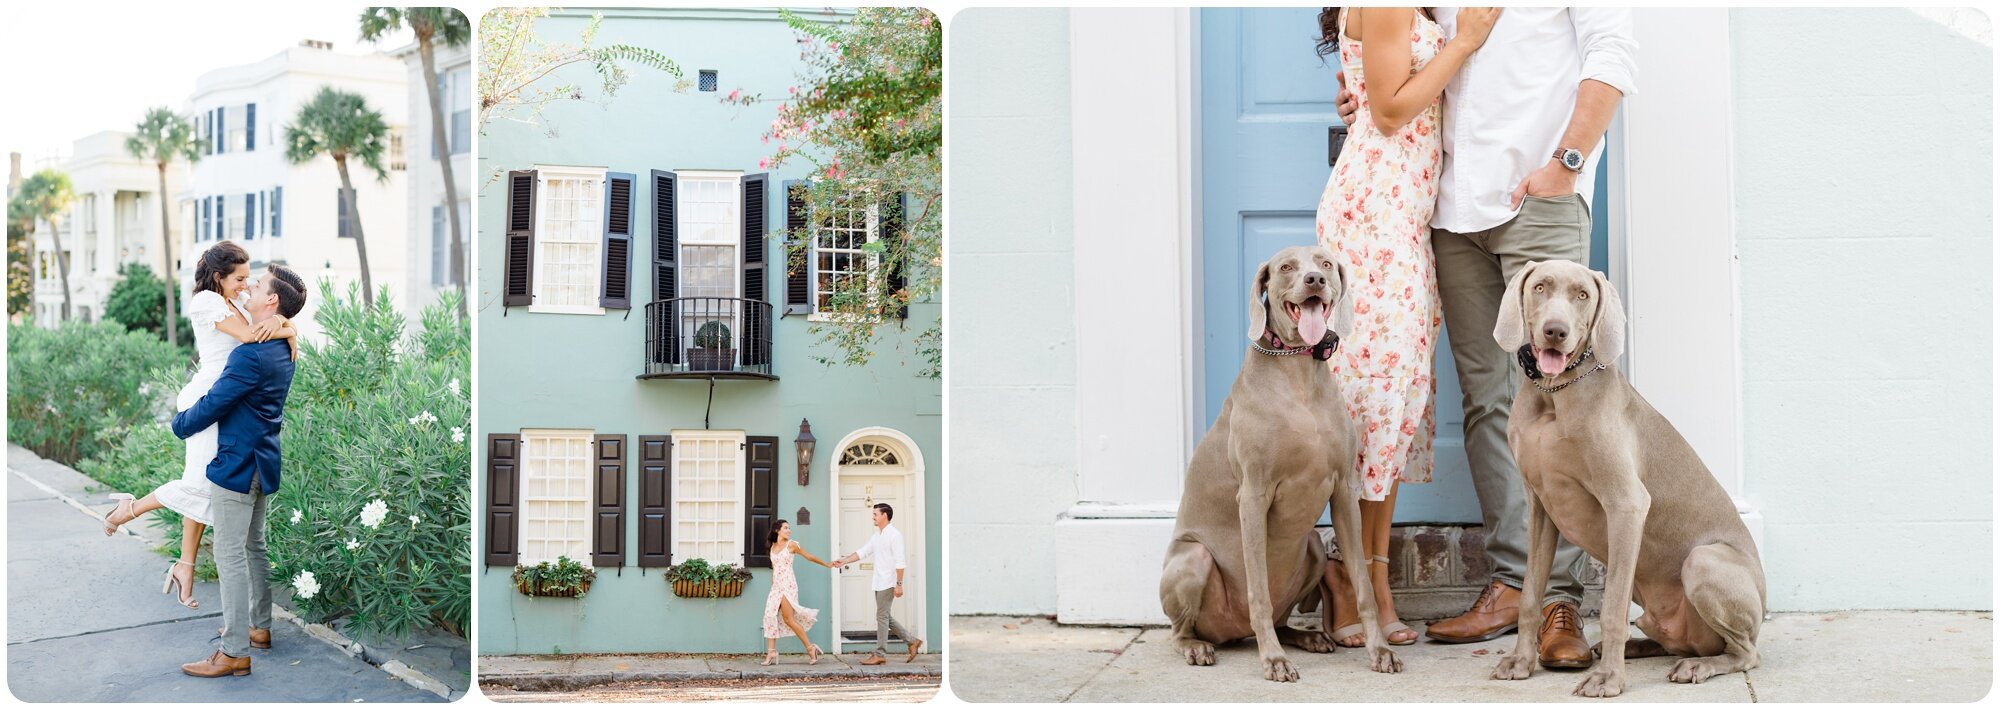 outdoor_engagement_session_candid_natural_charleston_destination_wedding_rainbow_row_colorful_kailee_dimeglio_photography_0001.jpg